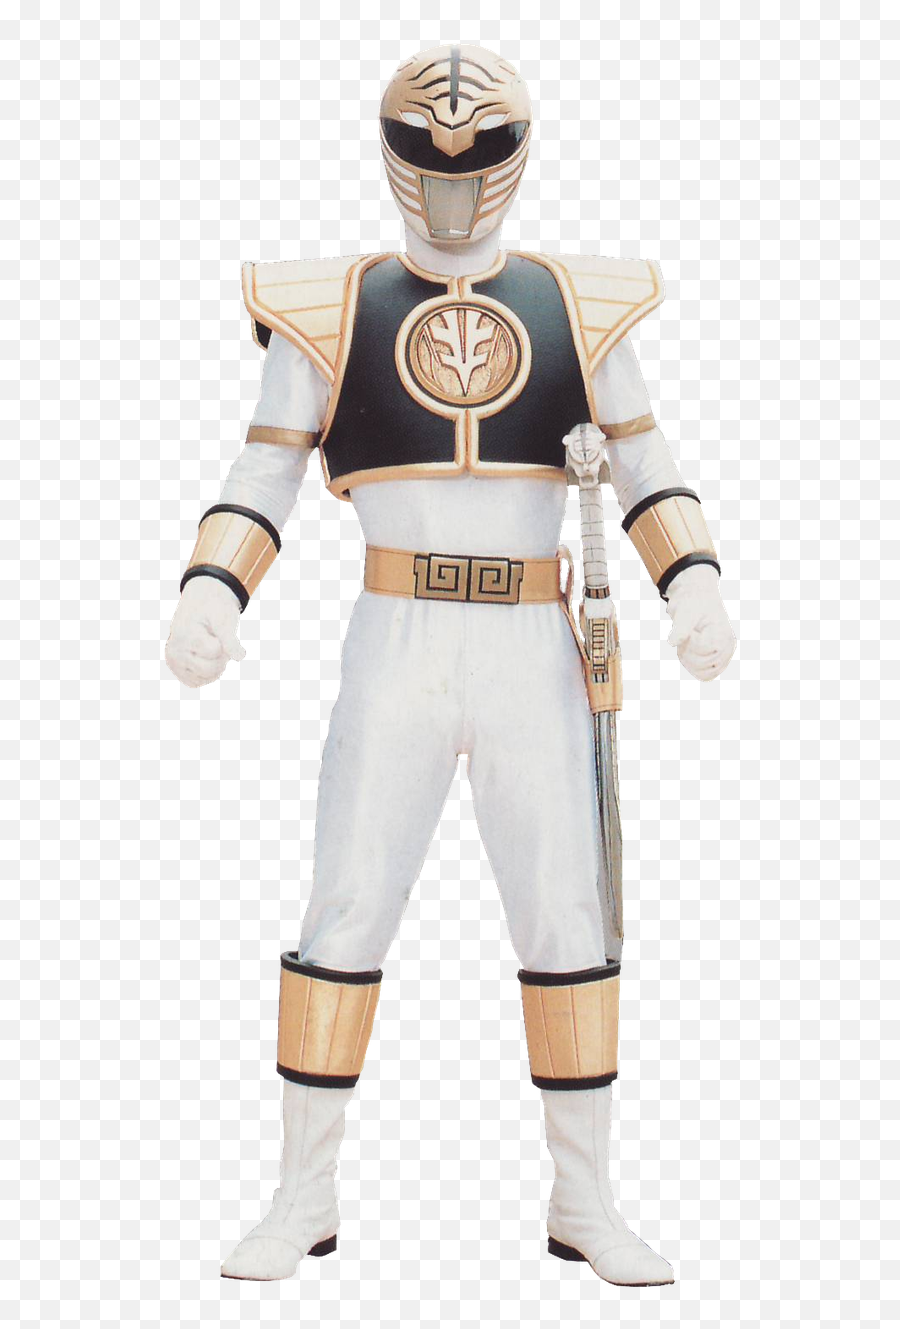 What Is The Name Of The Robot From The Power Rangers - Quora Emoji,Emotion Eric And Robot